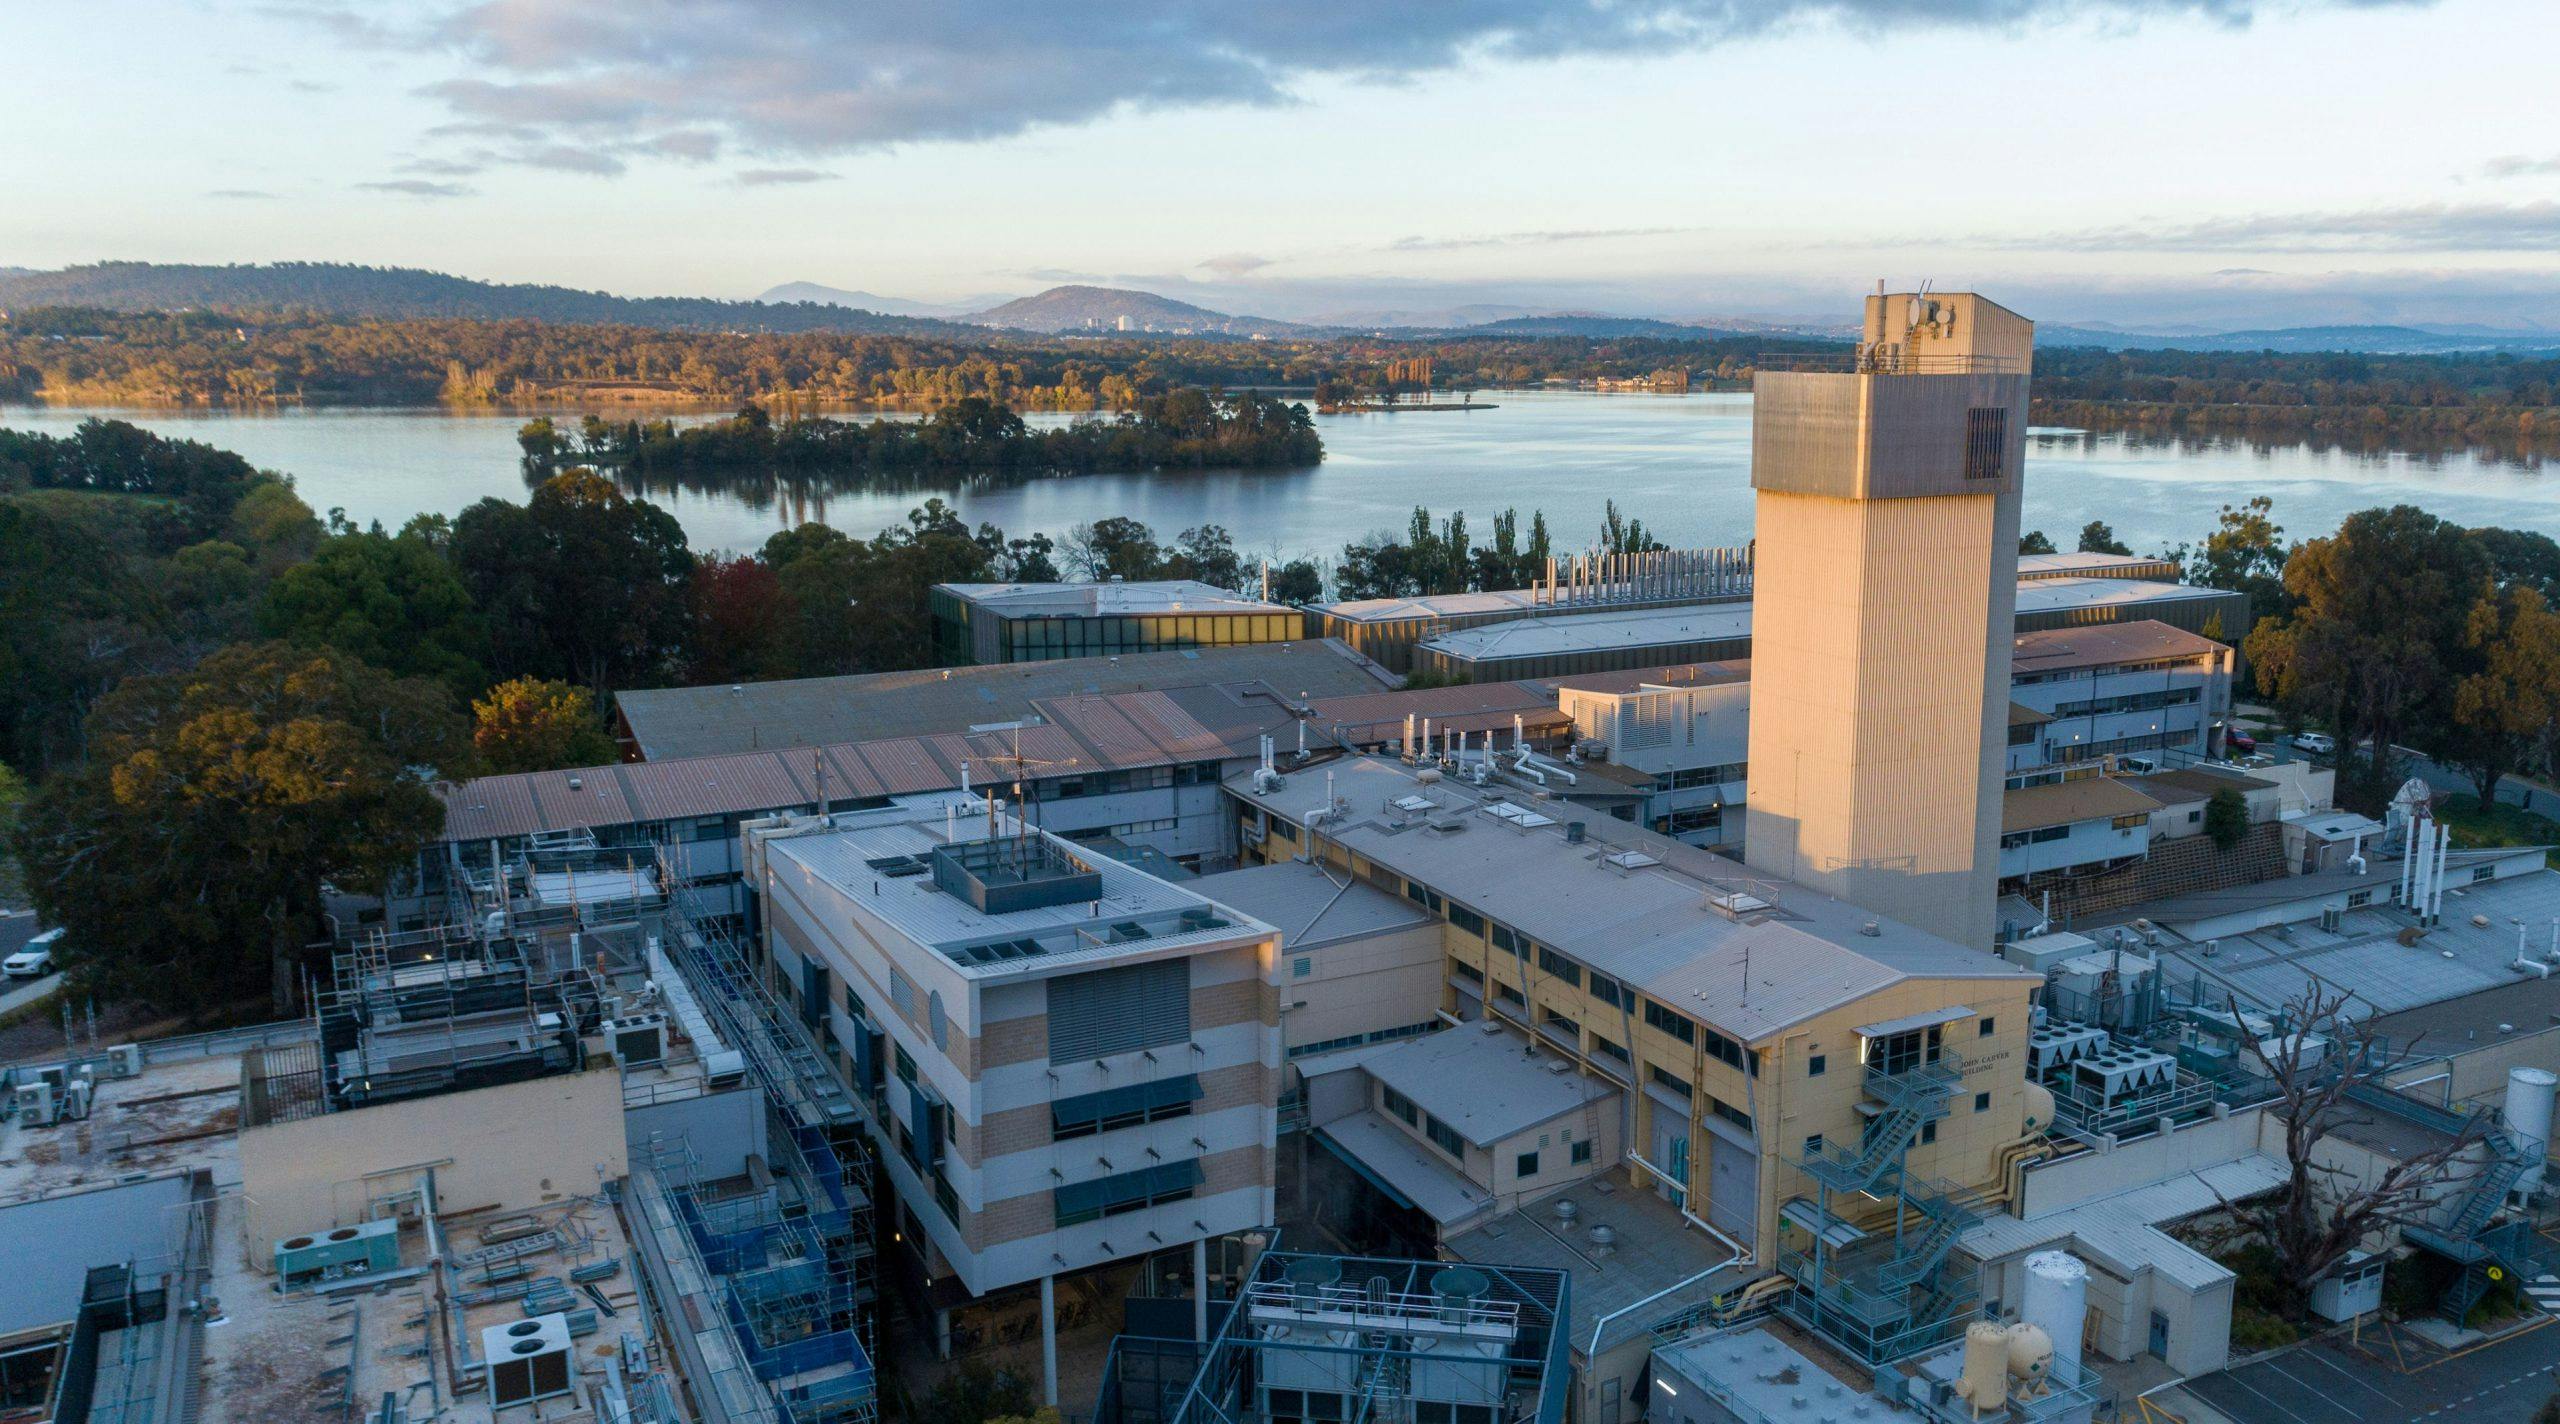 An aerial view of the ANU Research School of Physics, showing the tops of buildings and a large ivory tower rising up. Lake Burley Griffin is seen in the distance.